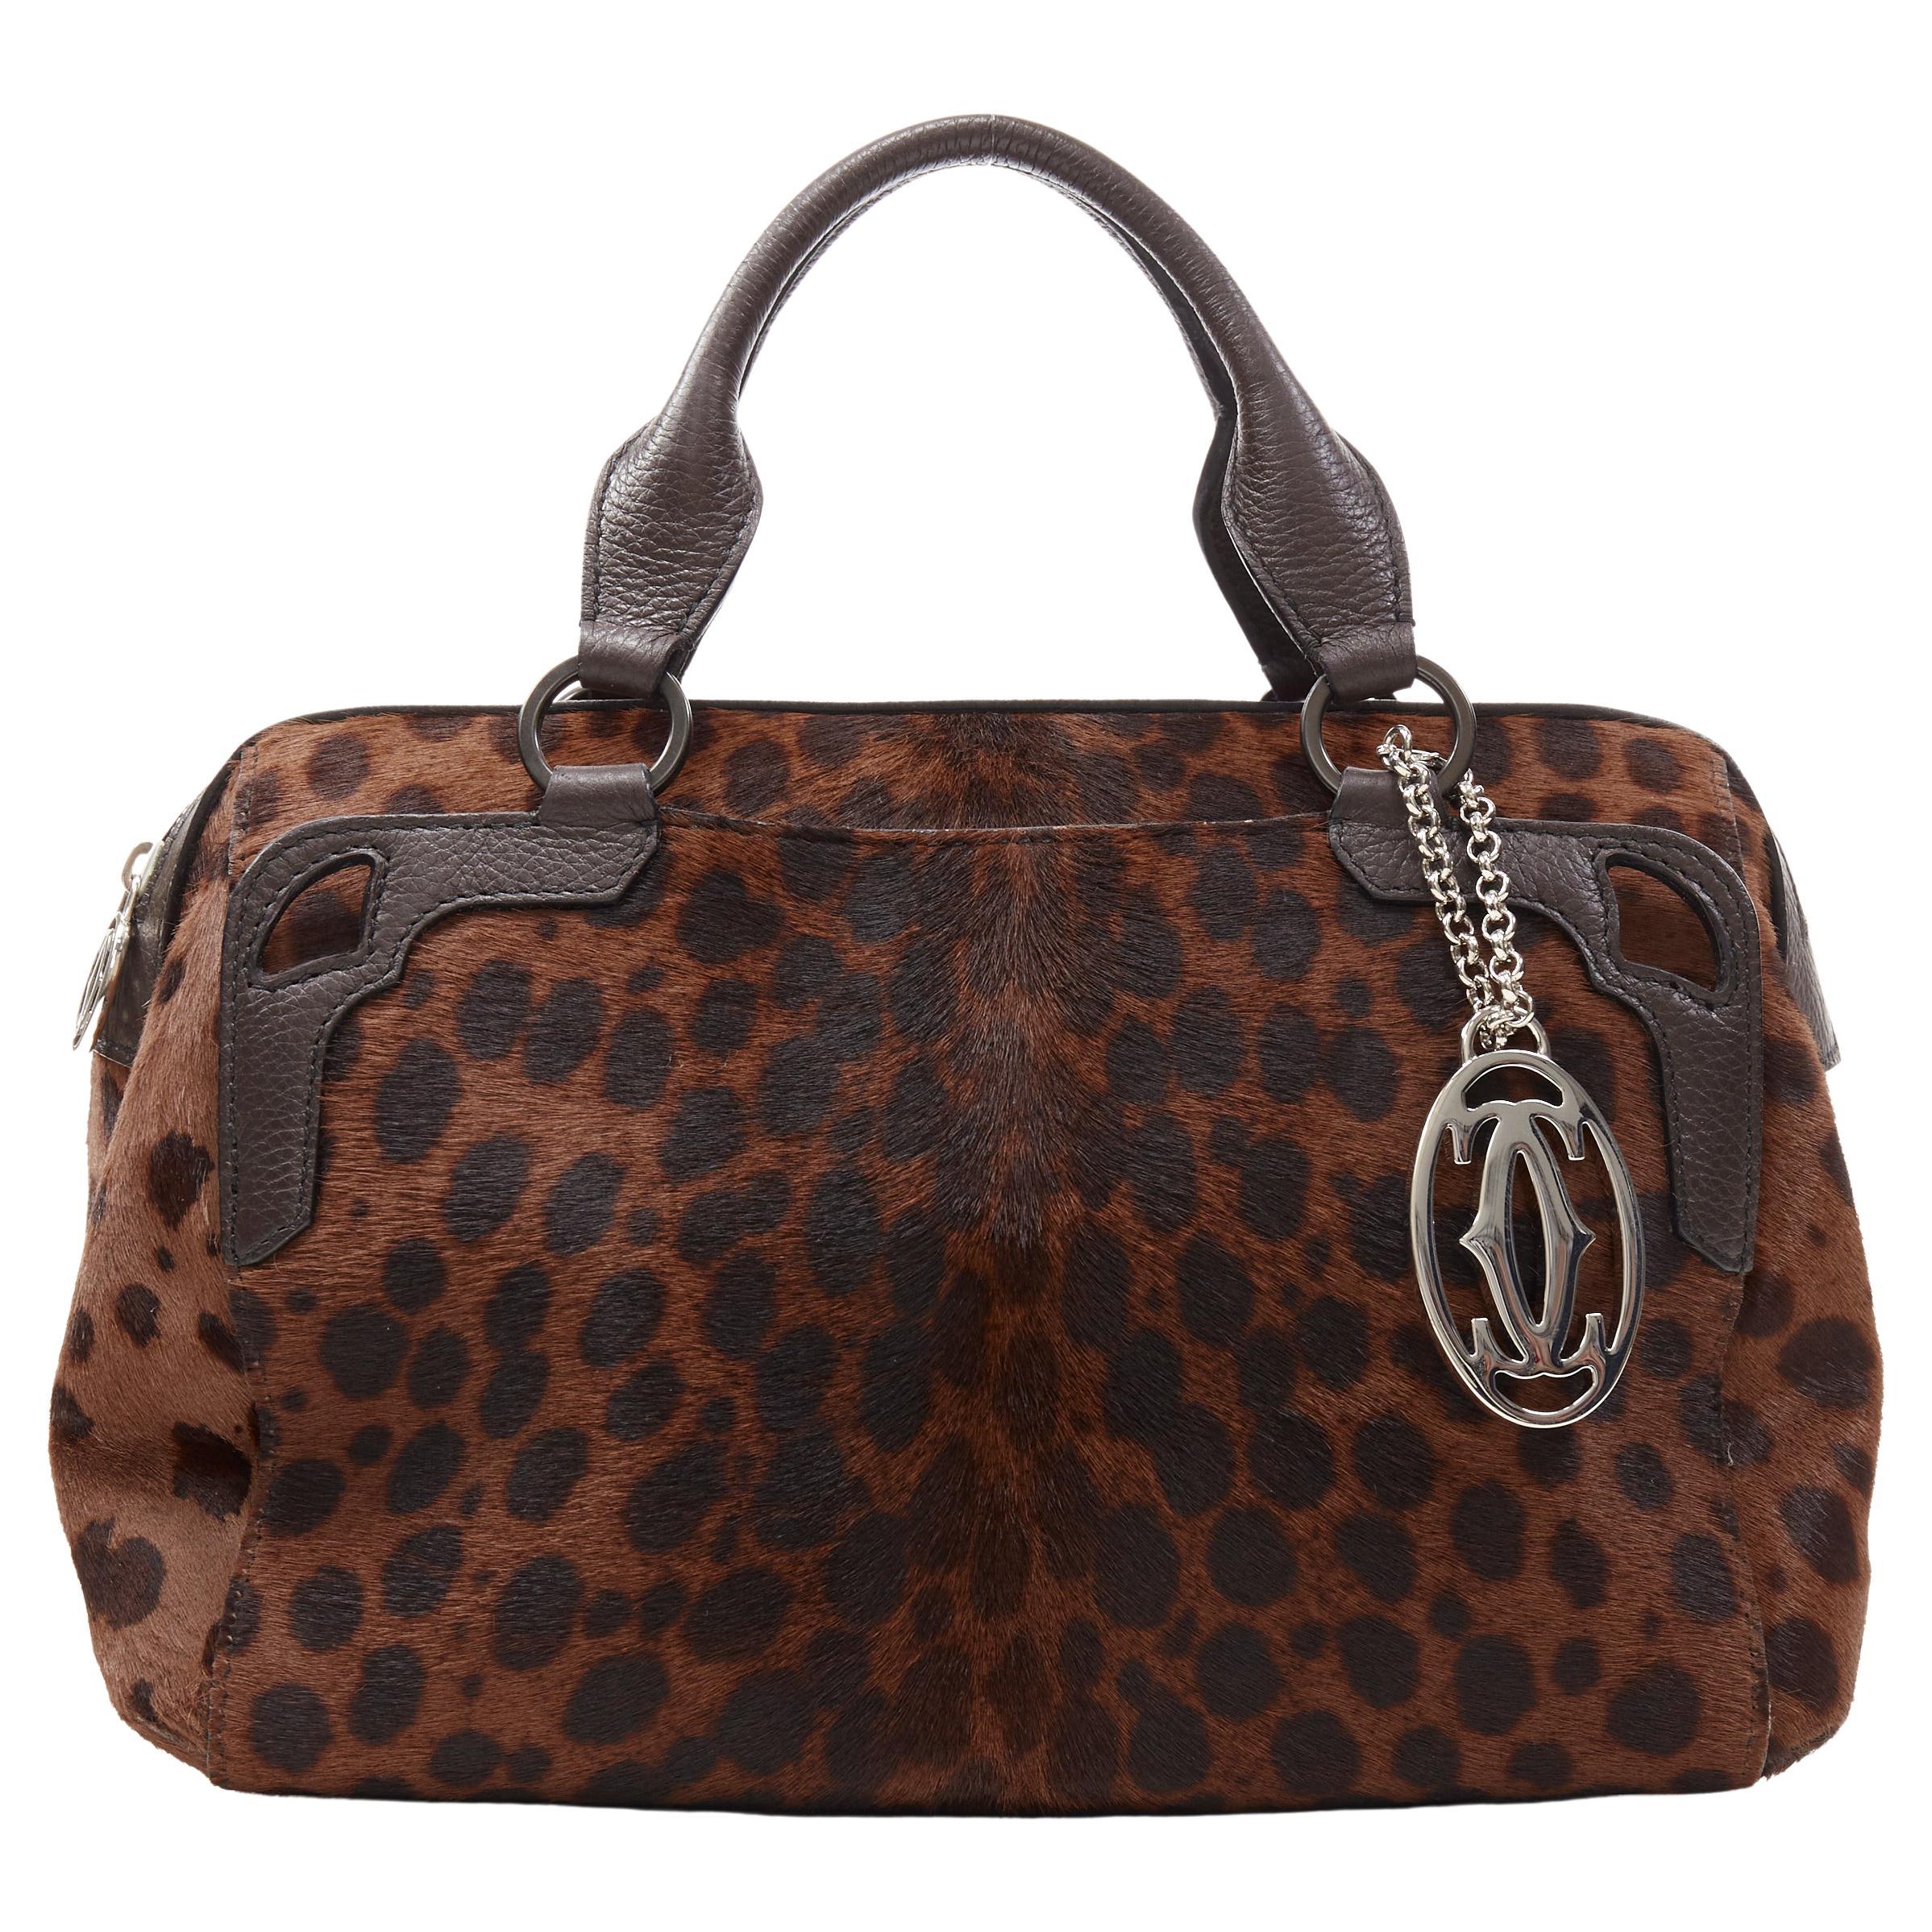 CARTIER brown leopard print pony hair leather small top handle boston bag